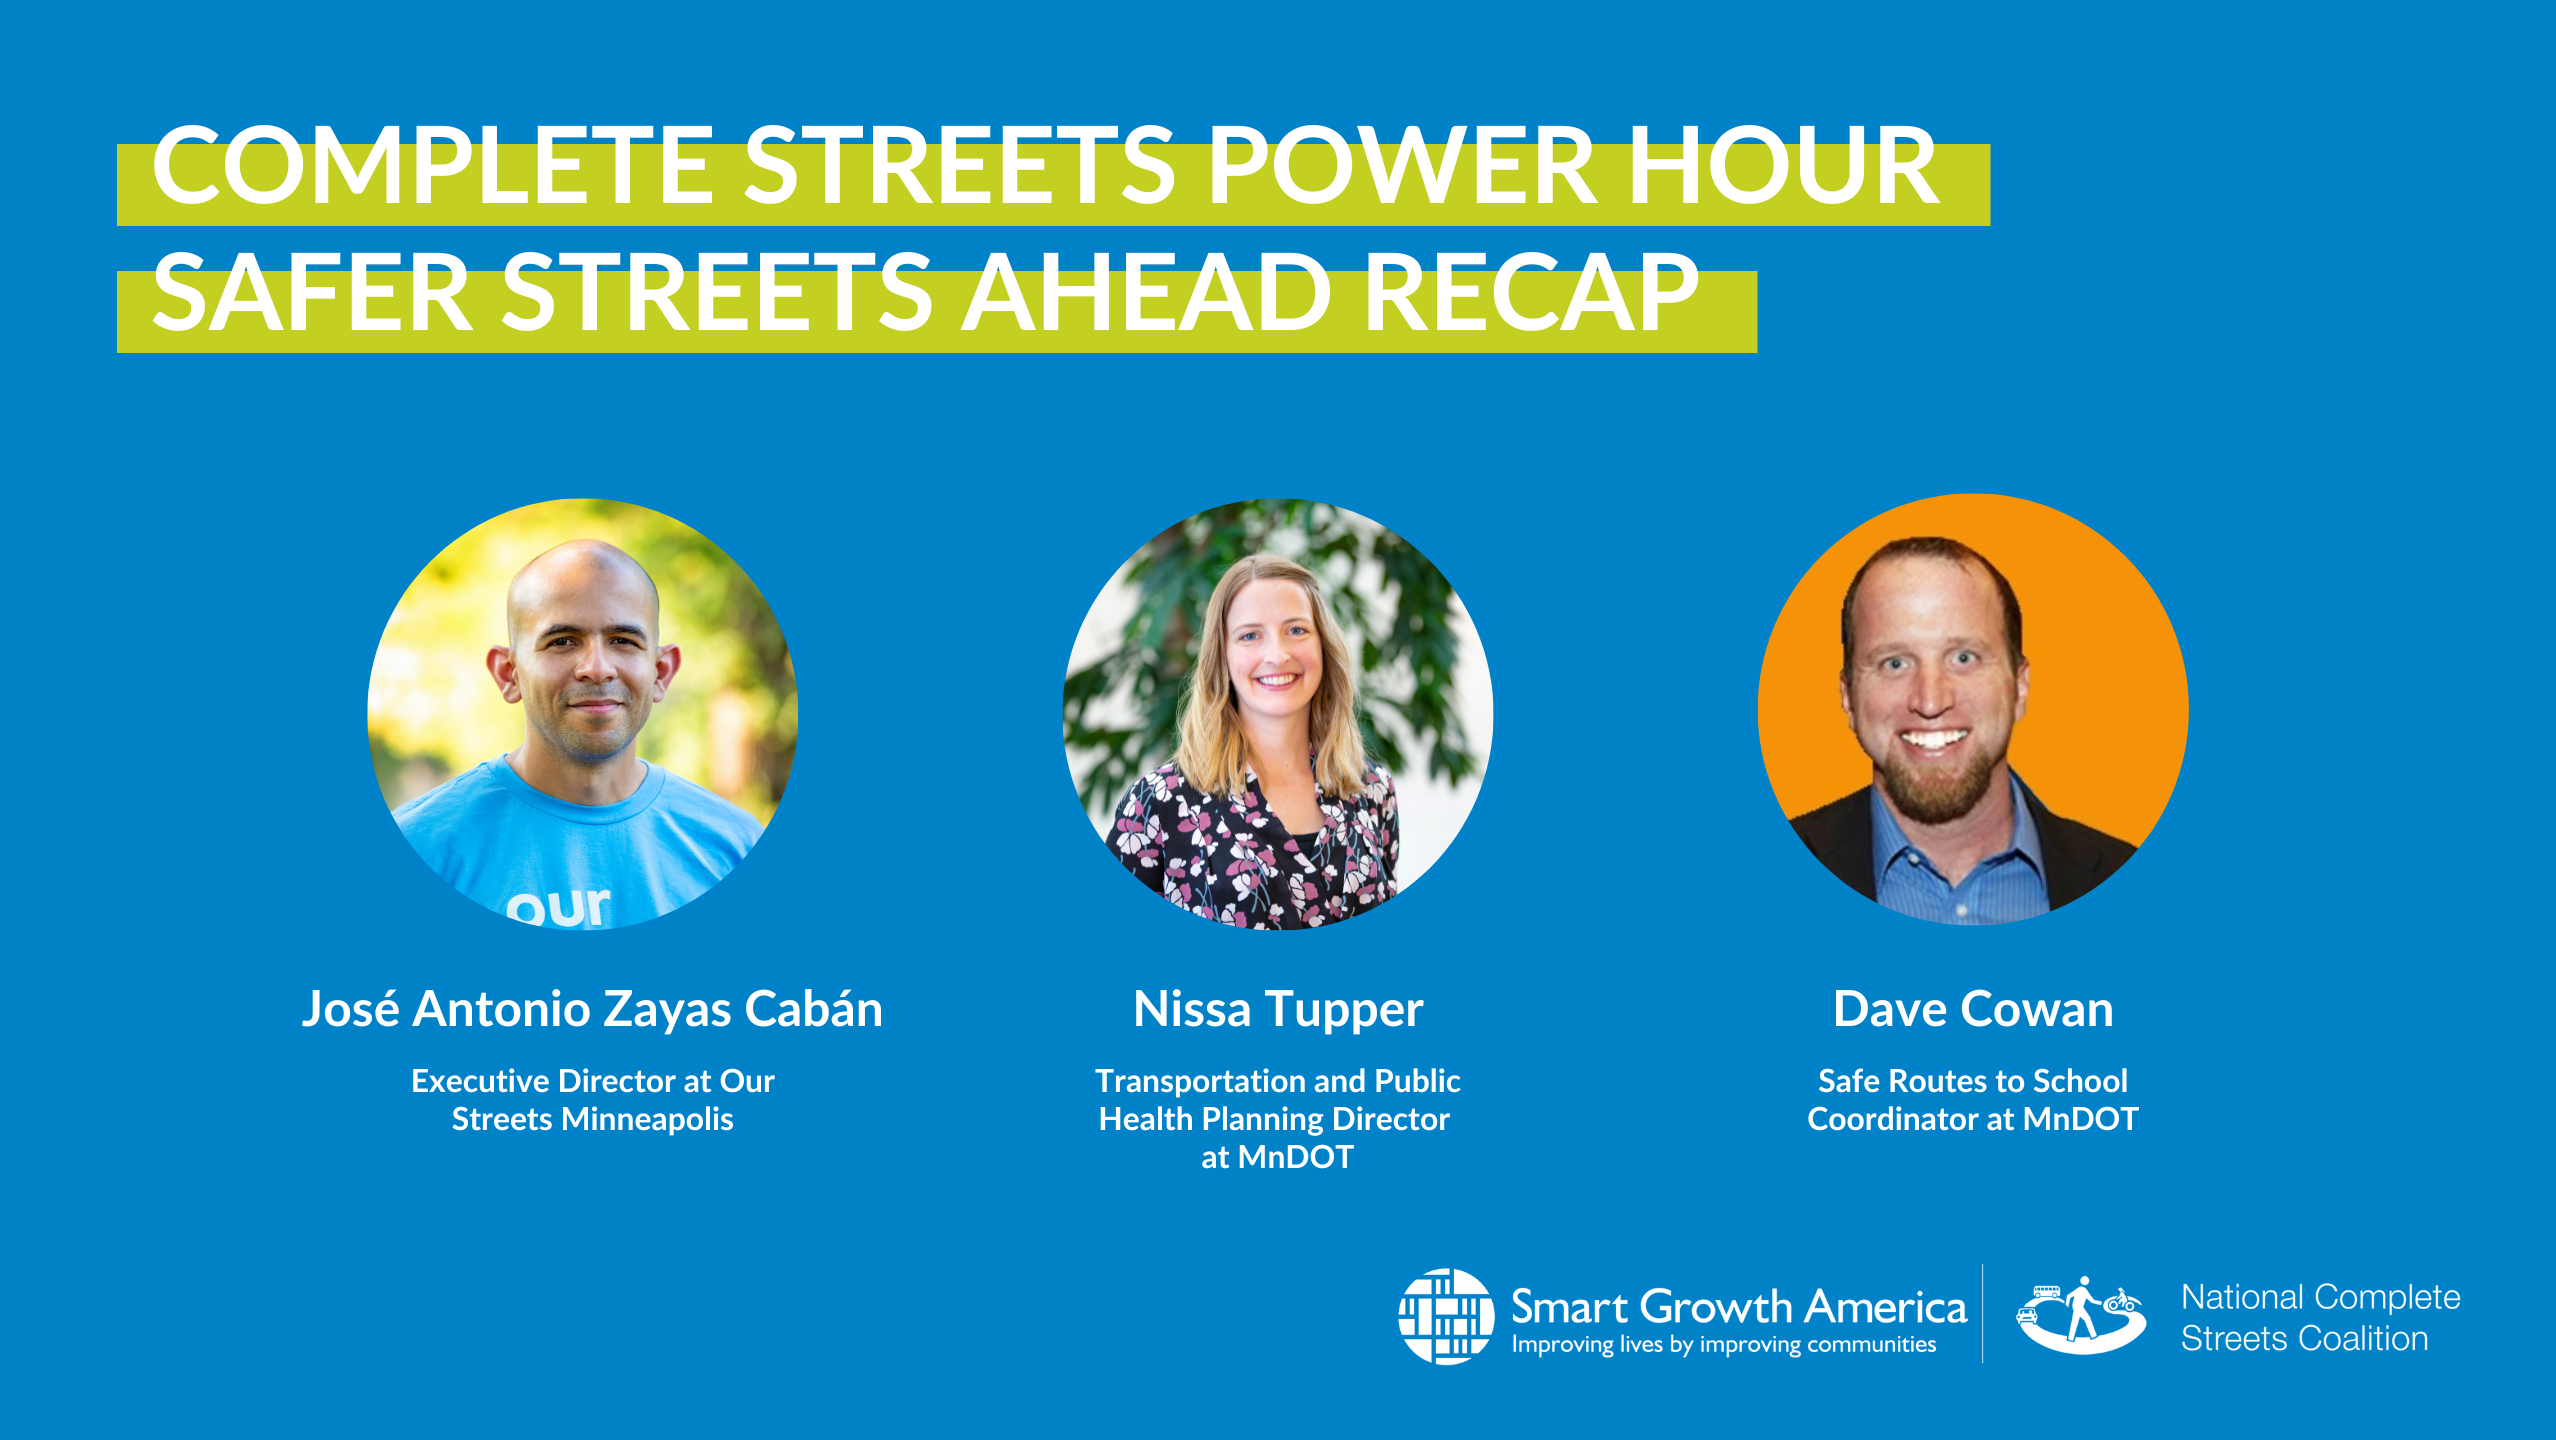 Vision is a verb: Looking back at our first Complete Streets Power Hour